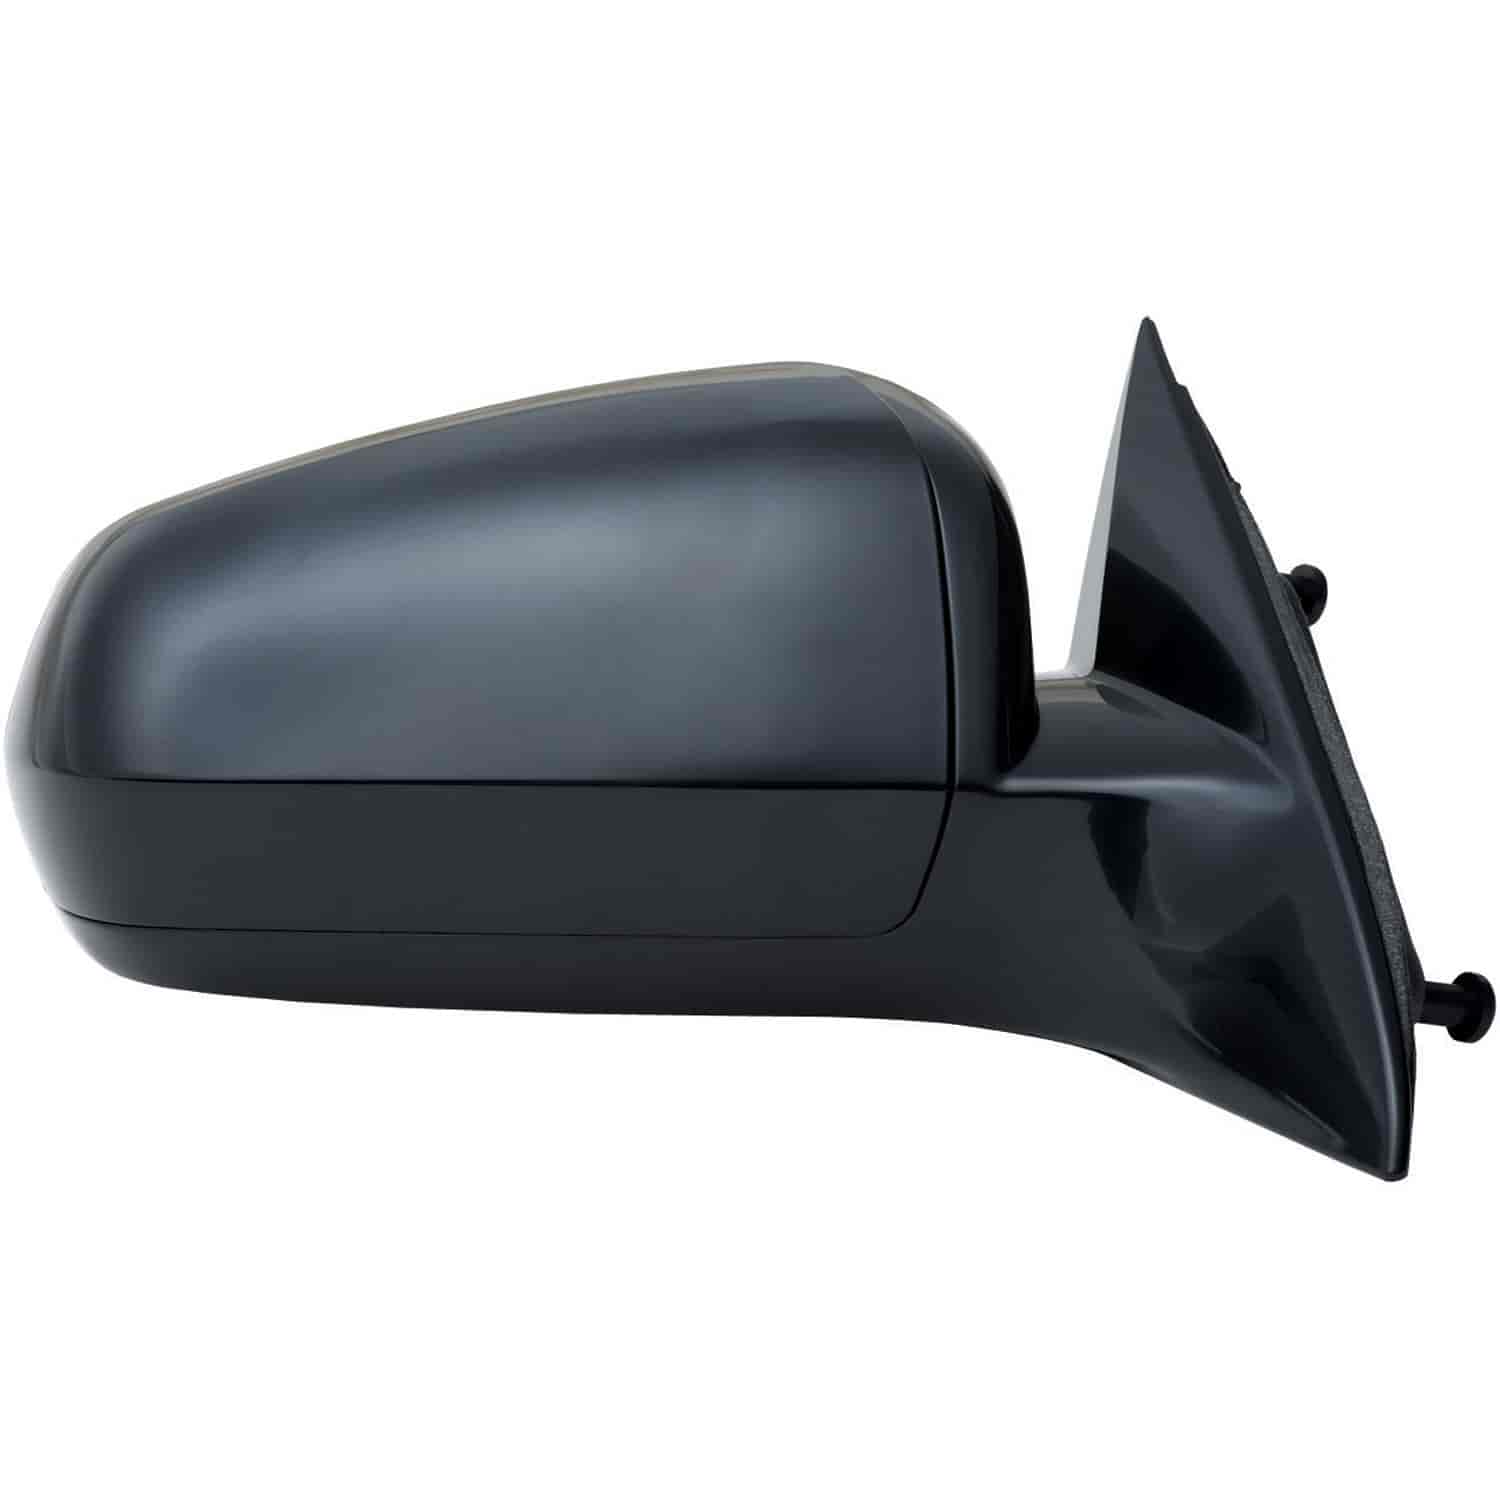 OEM Style Replacement mirror for 07-10 Chrysler Sebring Sedan passenger side mirror tested to fit an